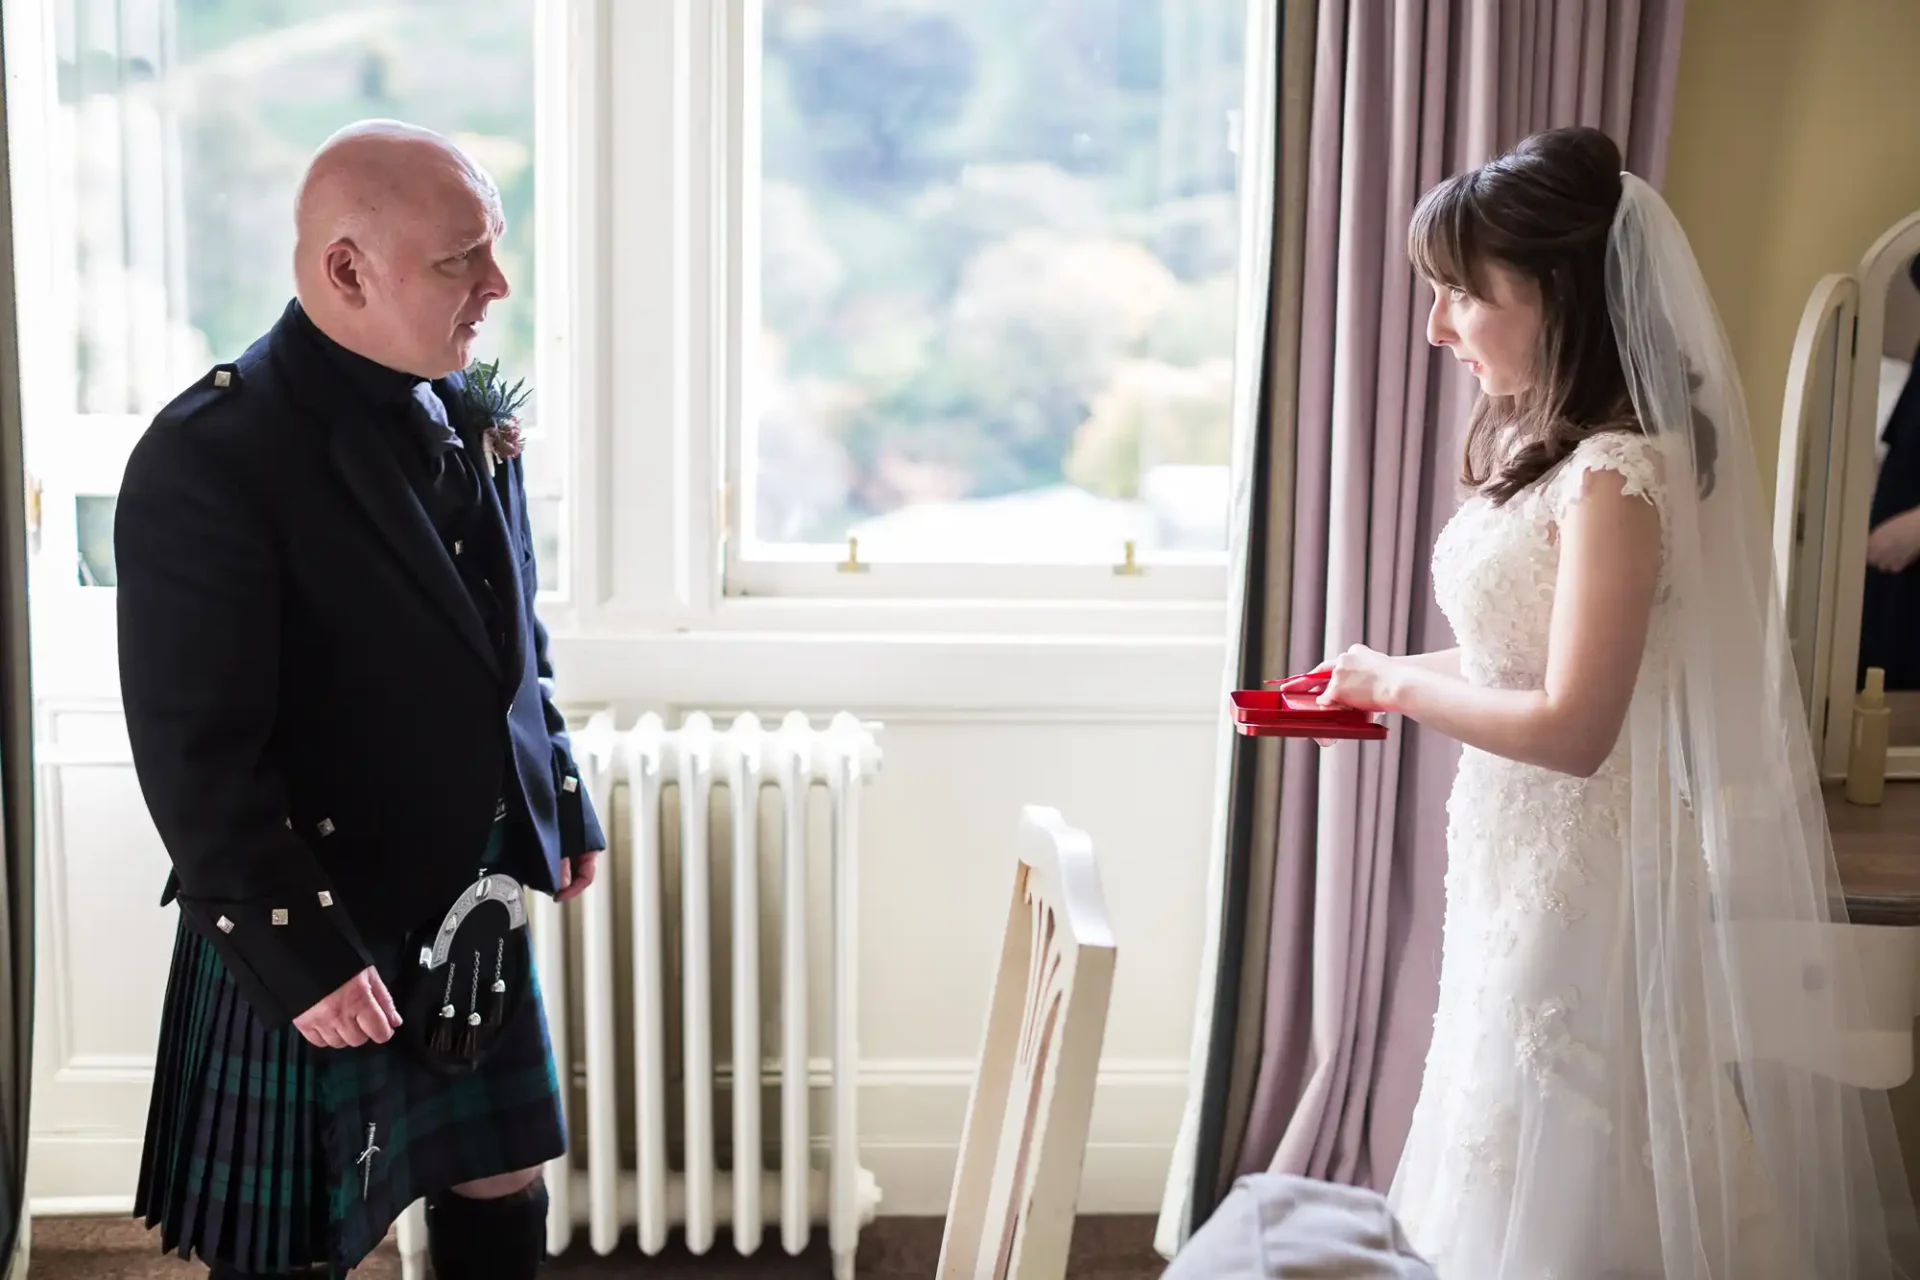 Bride in a white dress presenting a gift to a man in a kilt and formal jacket indoors, with a picturesque view from the window.